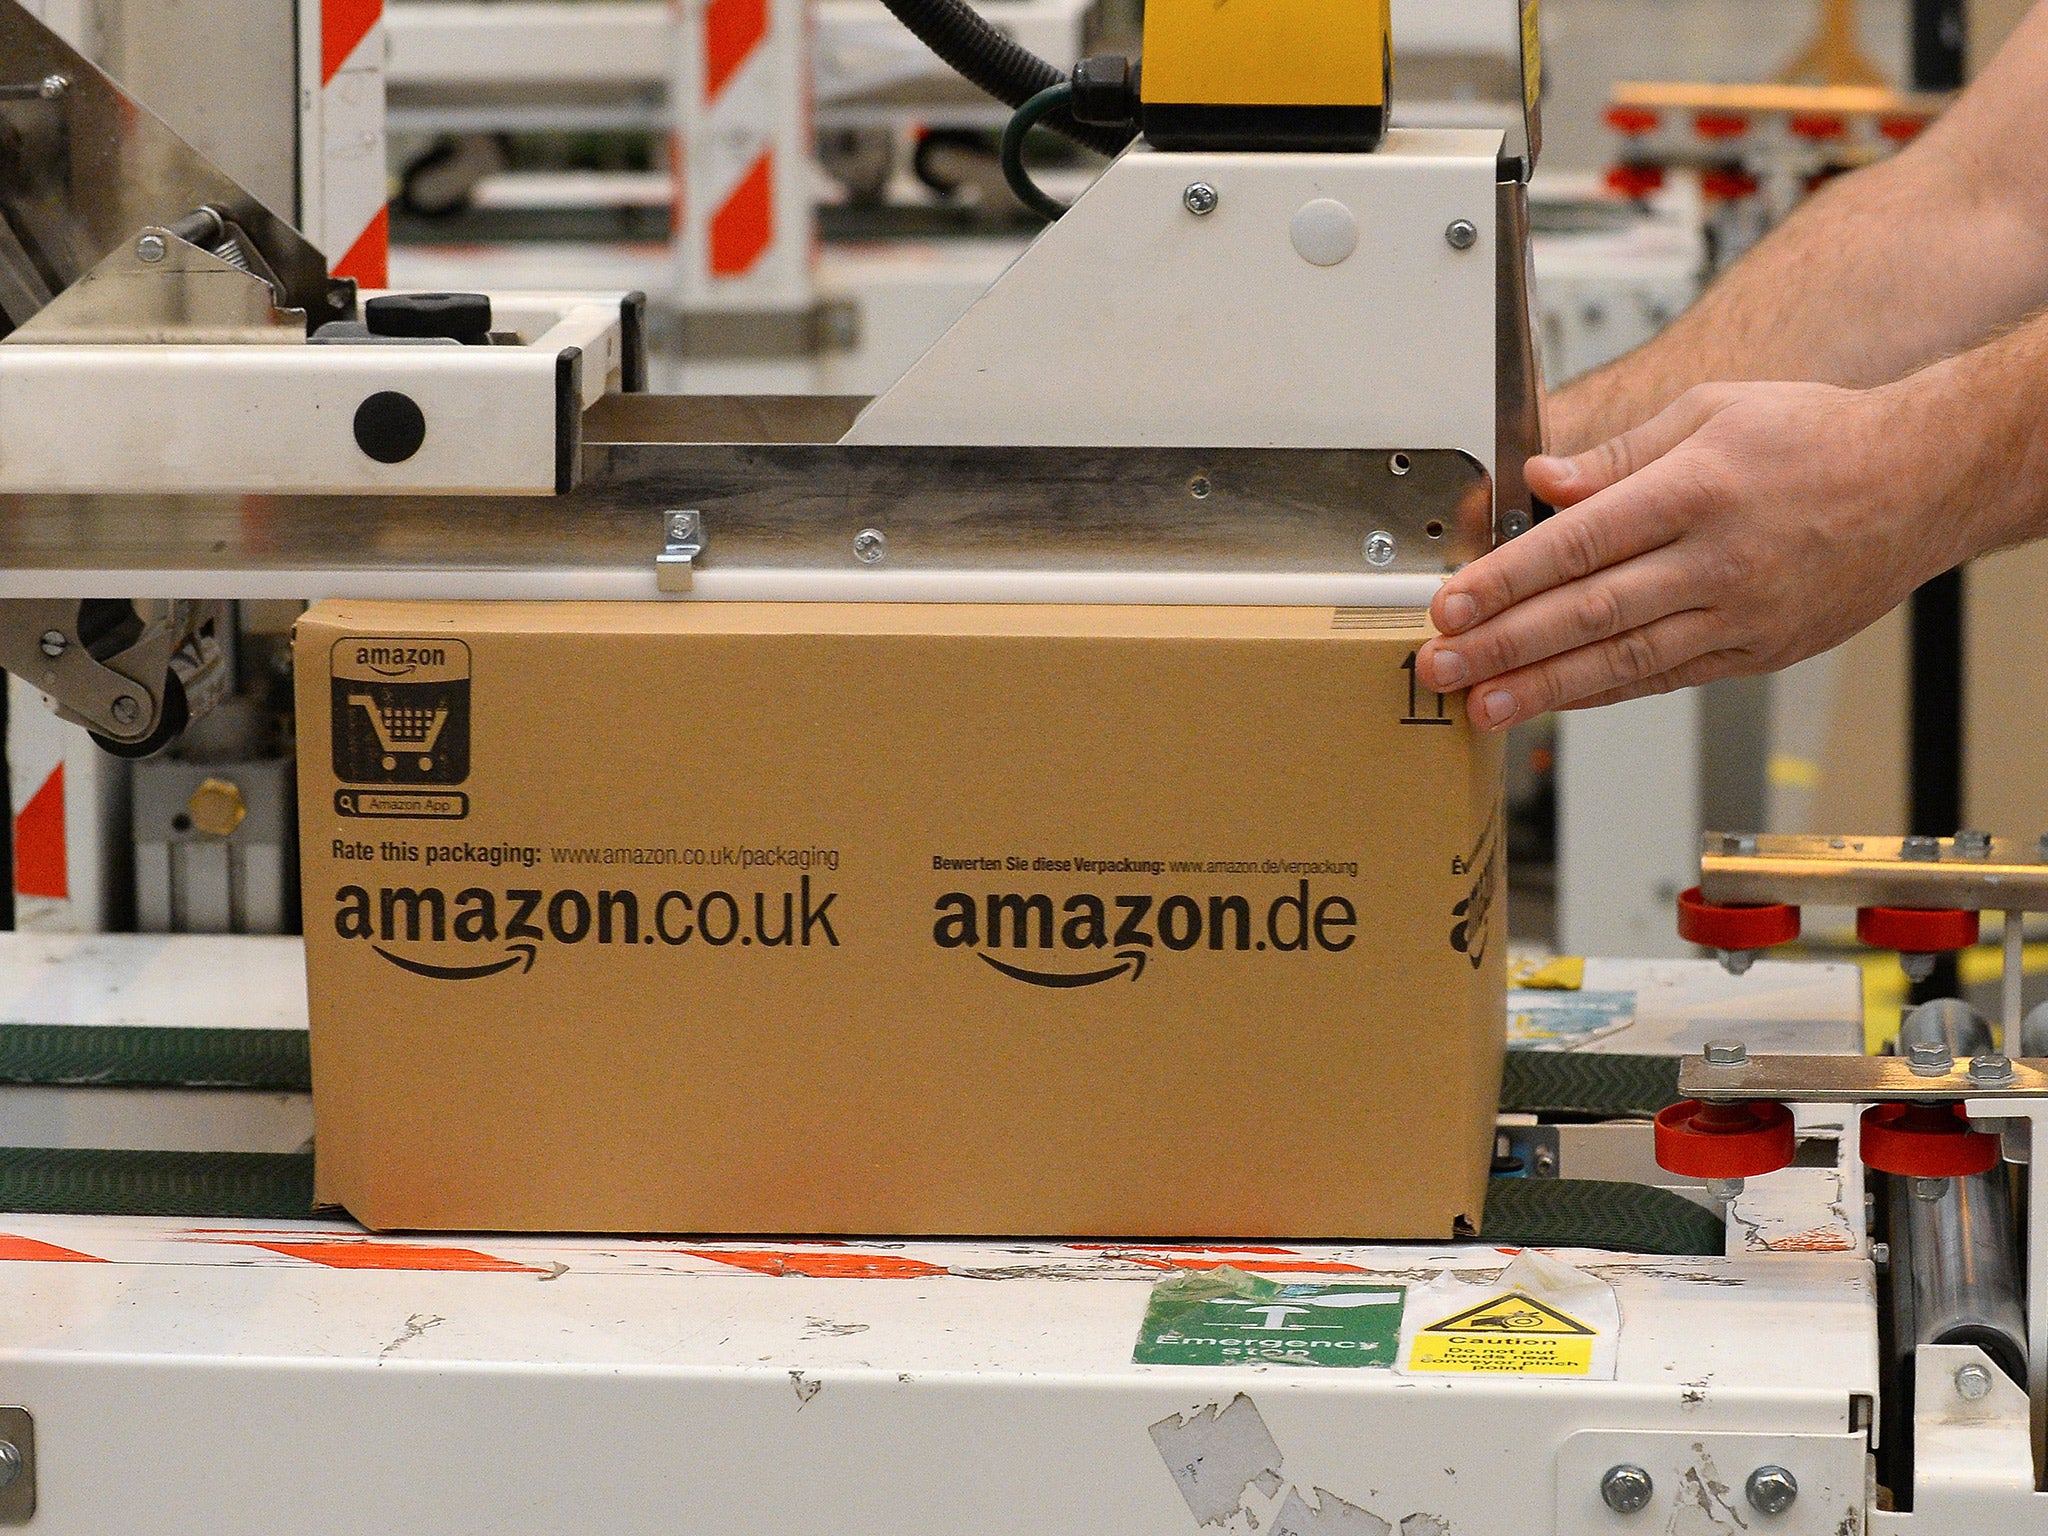 'Amazon, in case you hadn’t noticed, is about selling stuff'